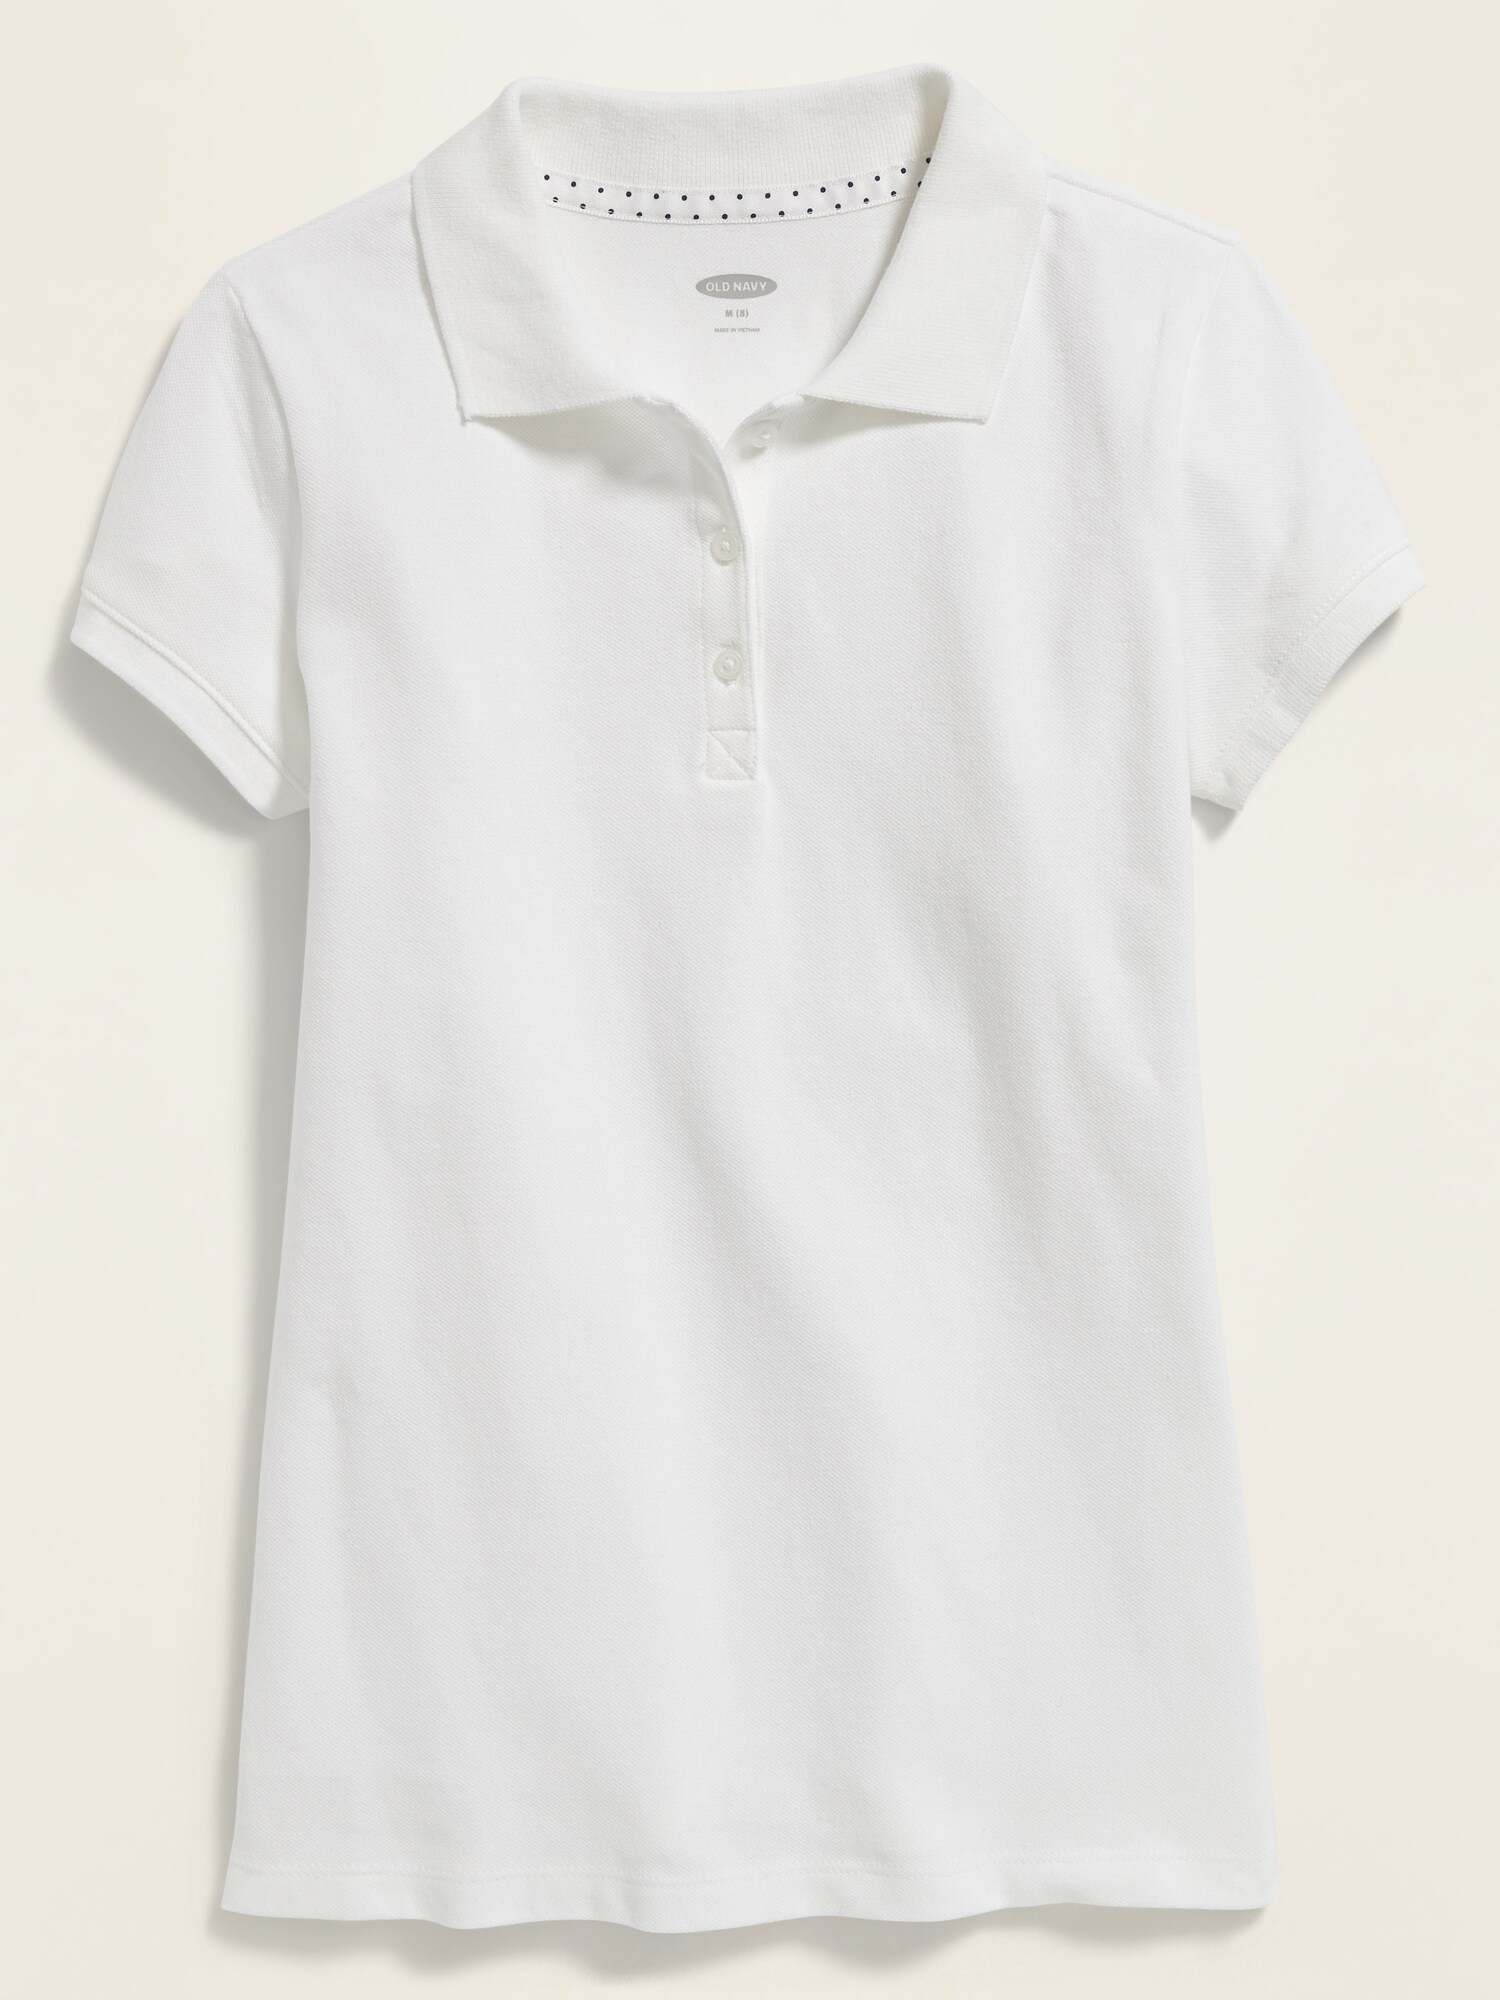 *Today Only Deal* Uniform Pique Polo for Girls